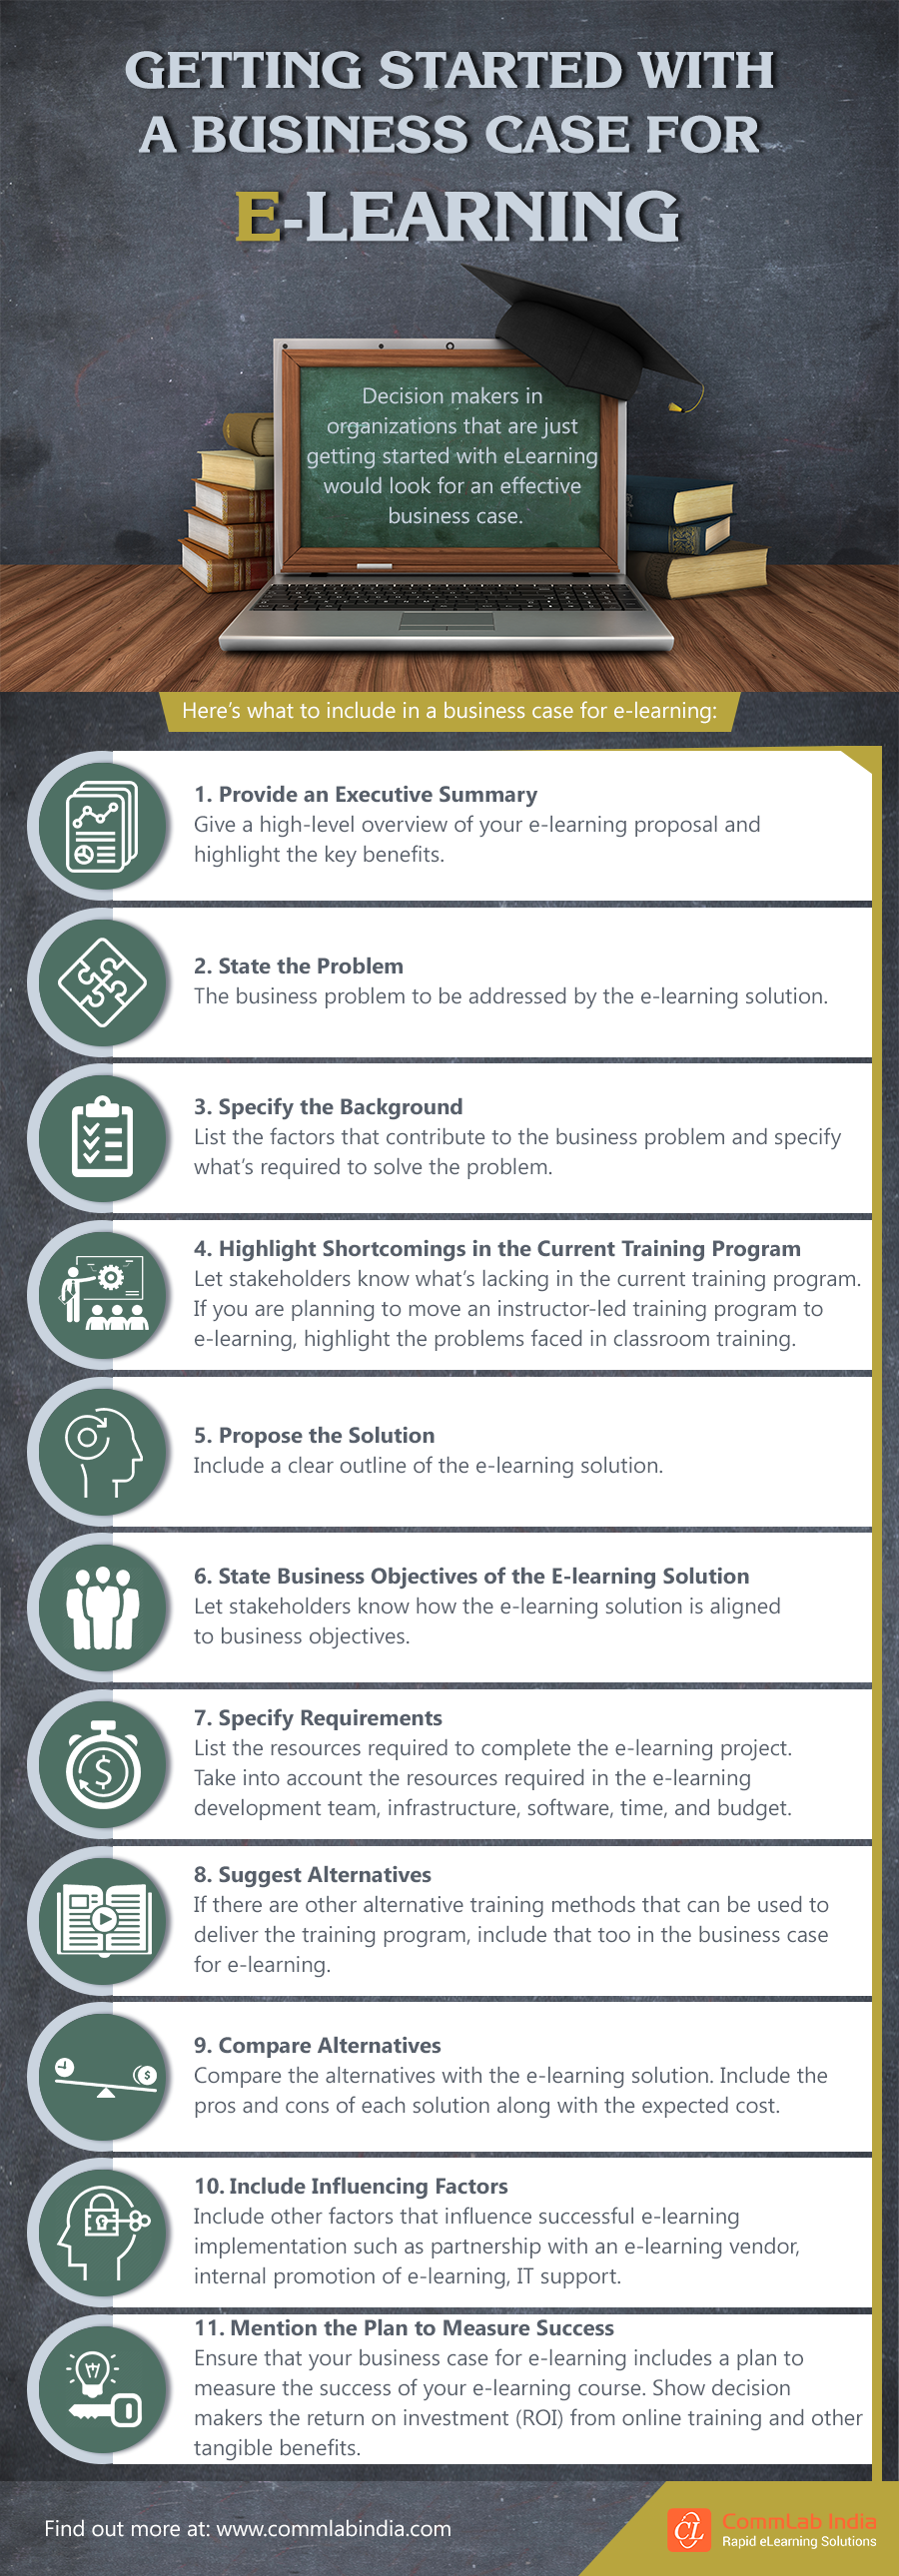 Getting Started with a Business Case for eLearning [Infographic]